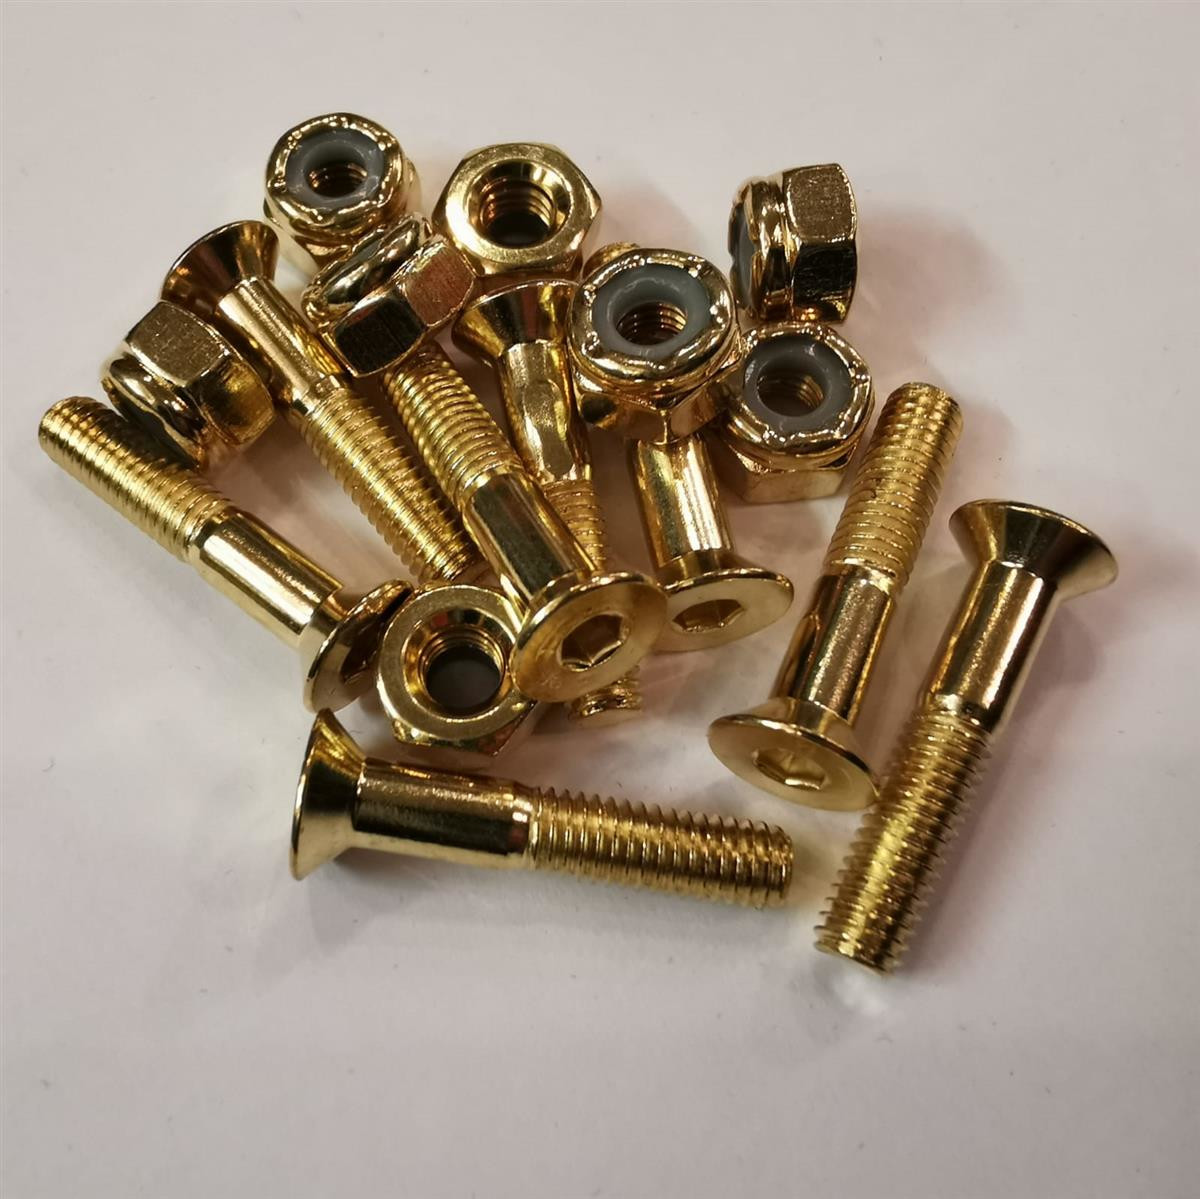 Montagesatz anodized gold 1" nuts and bolts